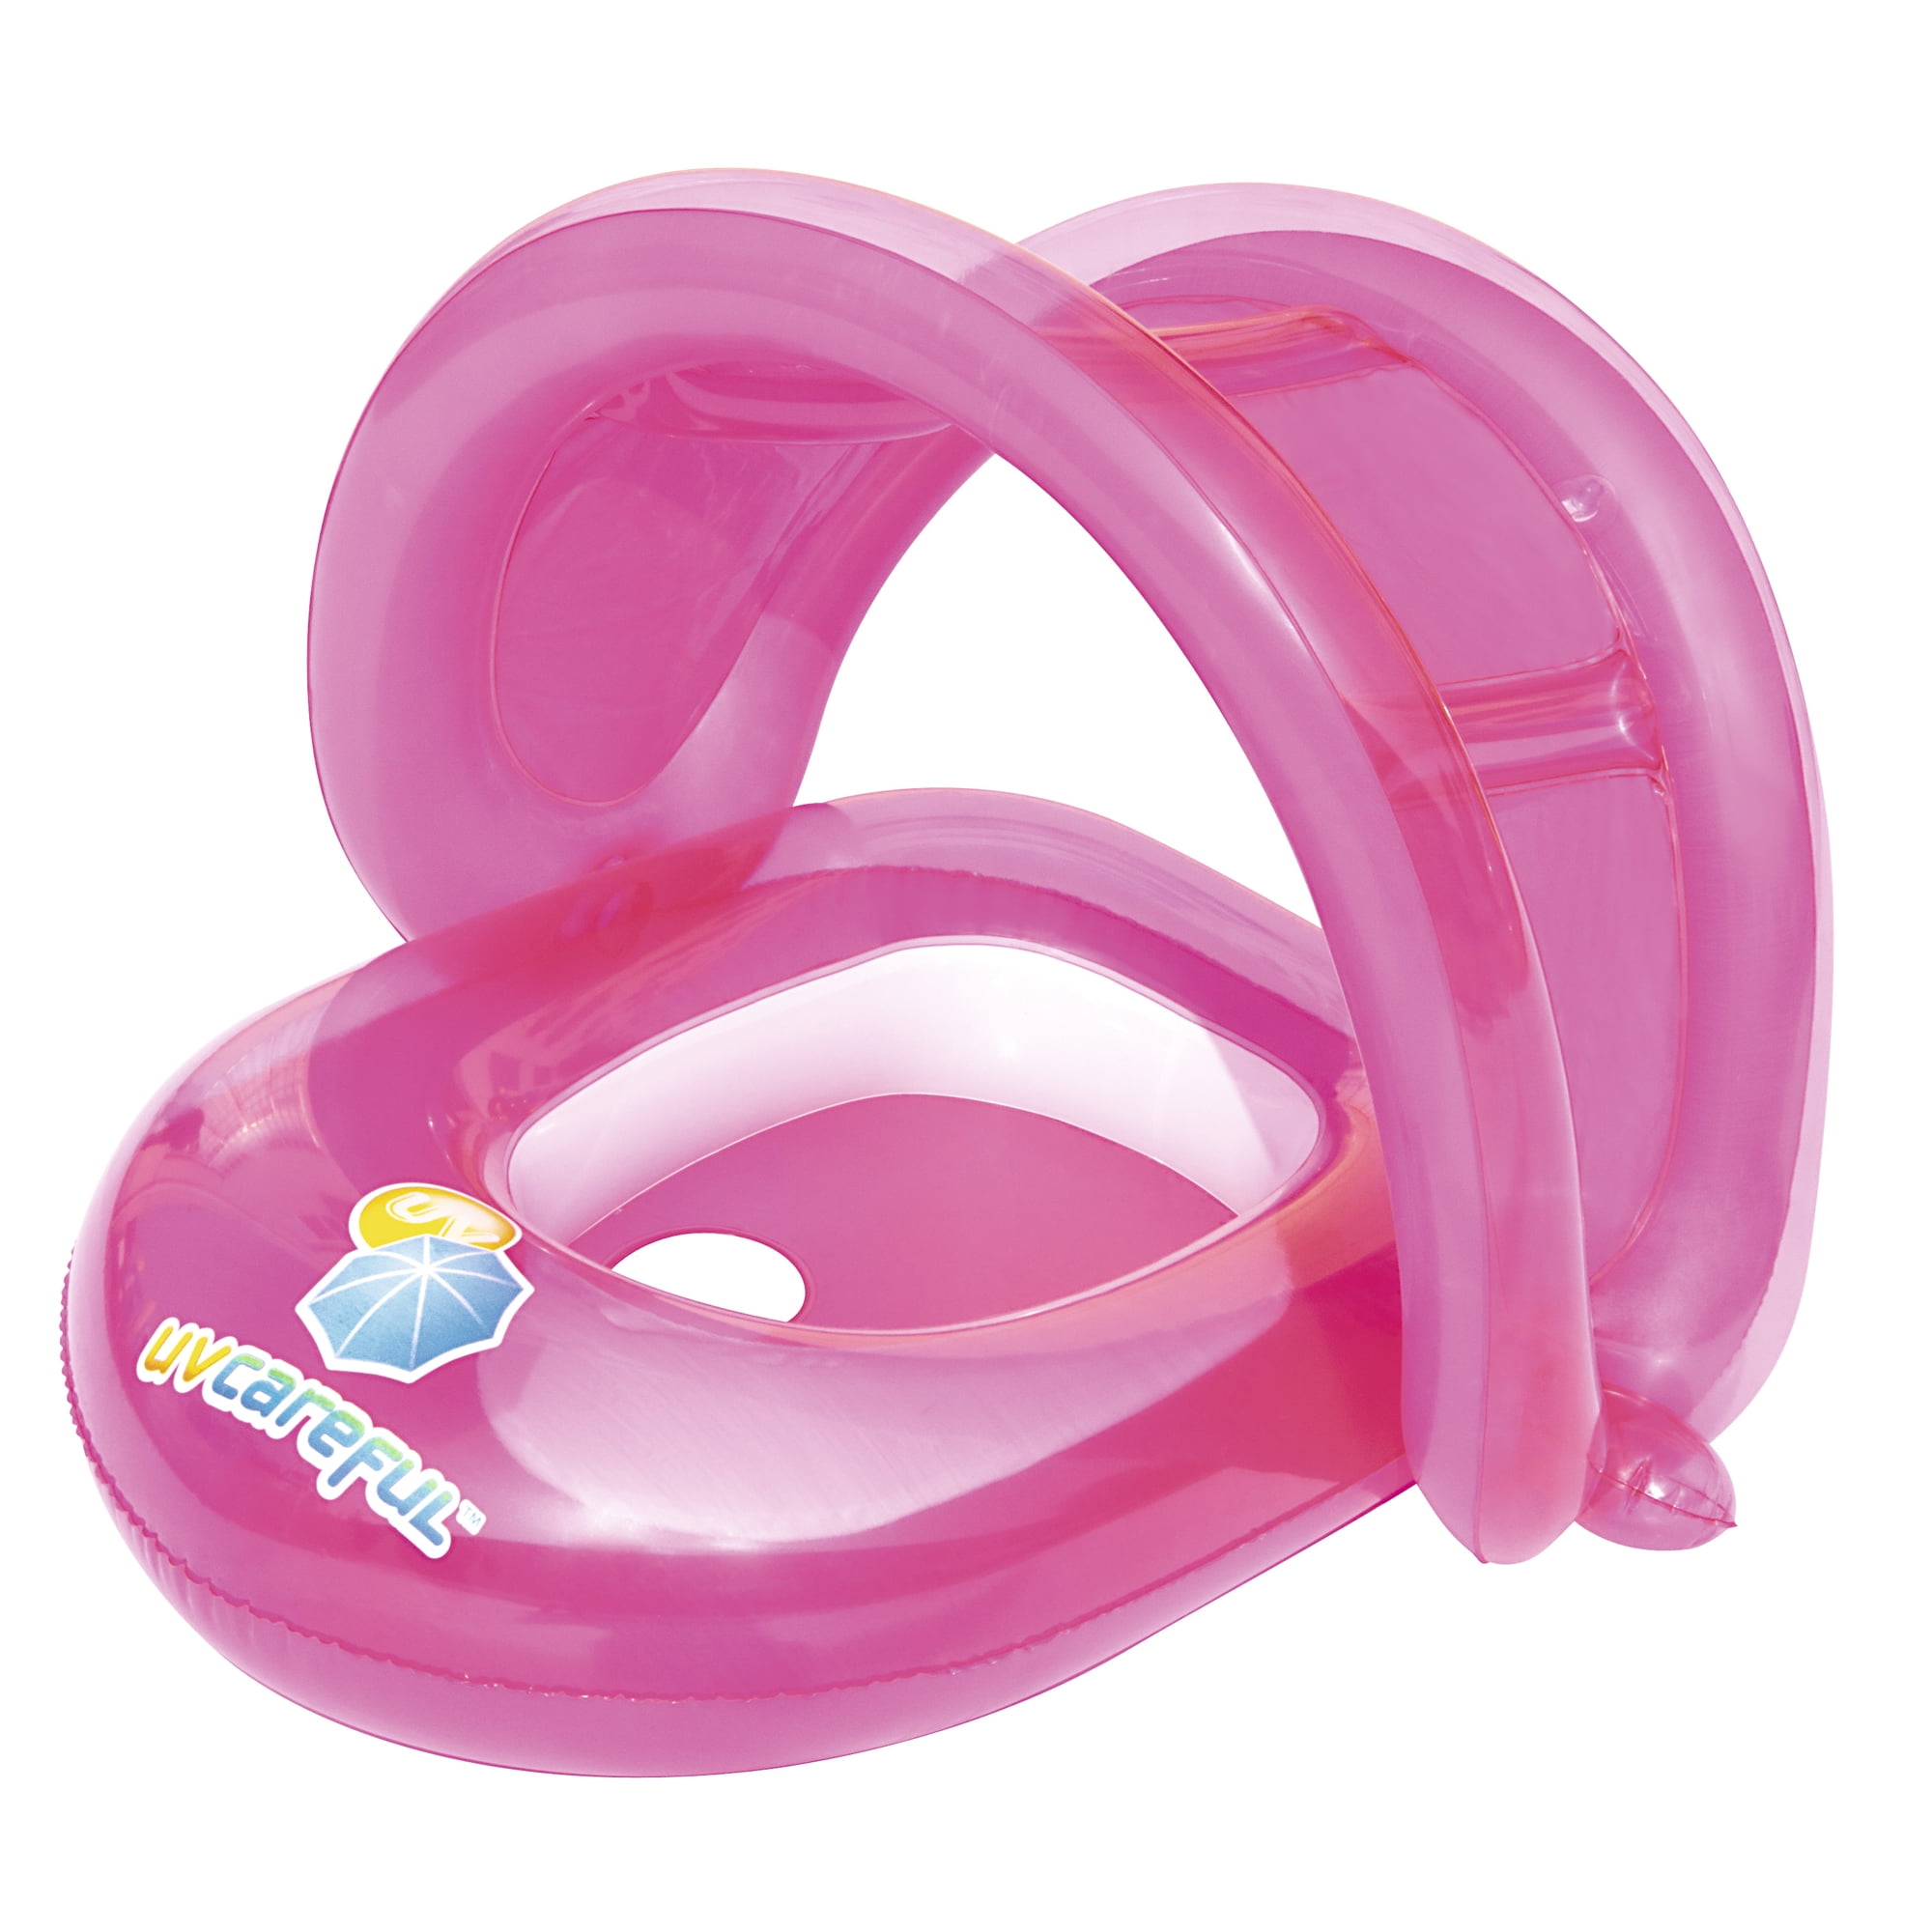 H2o Go 2 Pink Baby Car Seat Inflatable Leisure Pool Float Uv50 Careful for sale online 